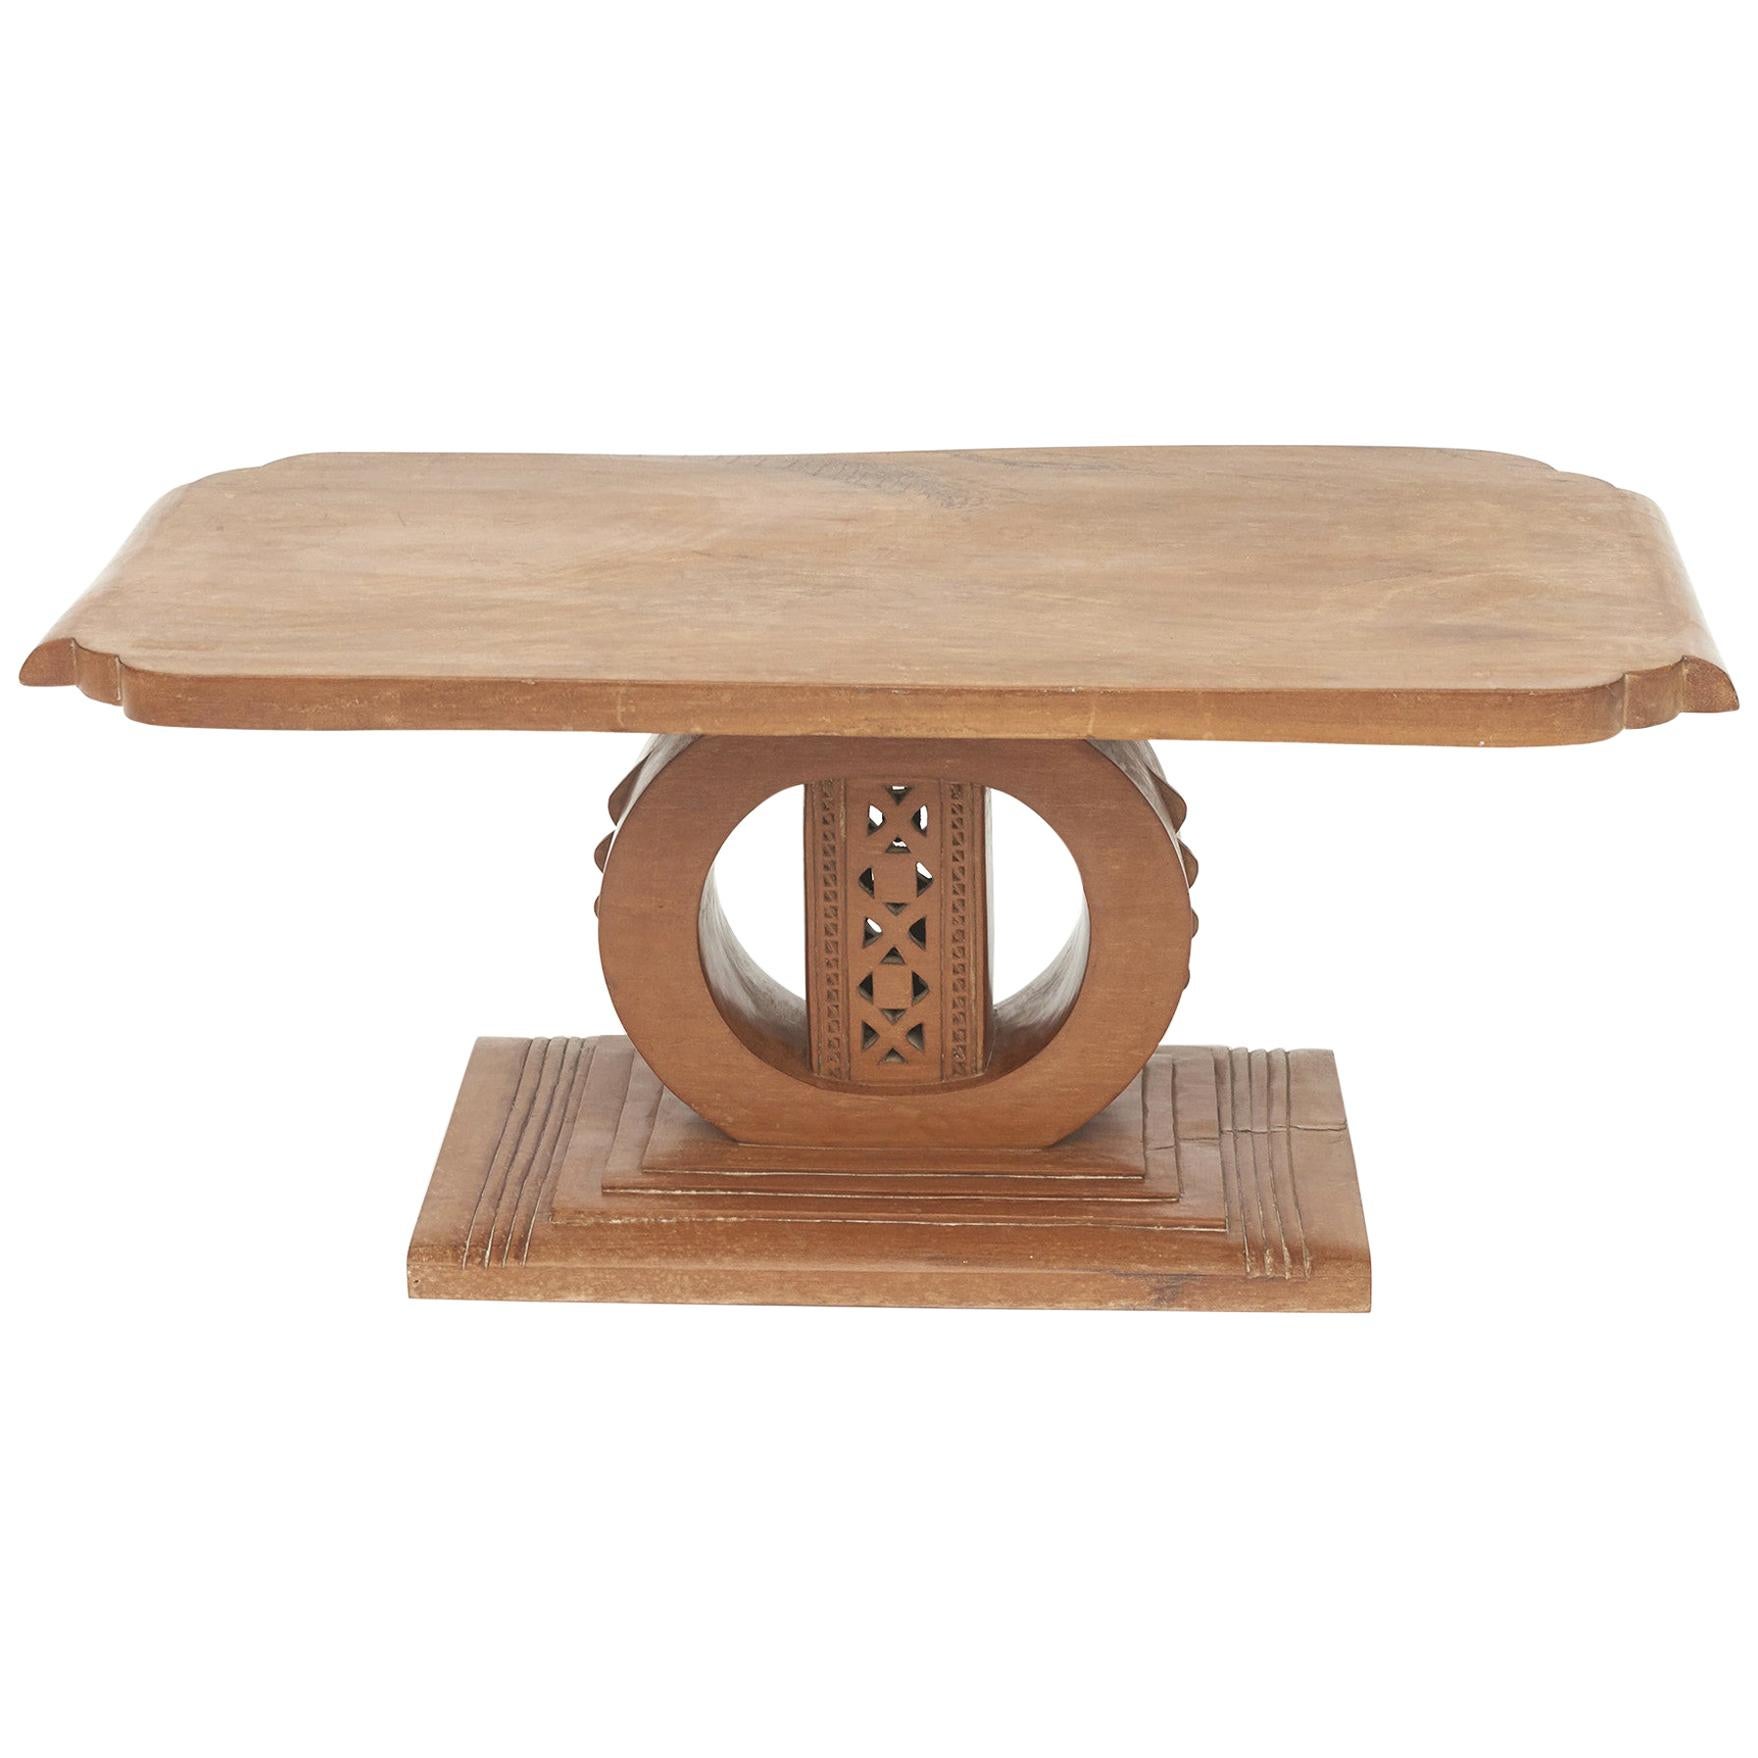 Ashanti Coffee Table or End Table from Ghana